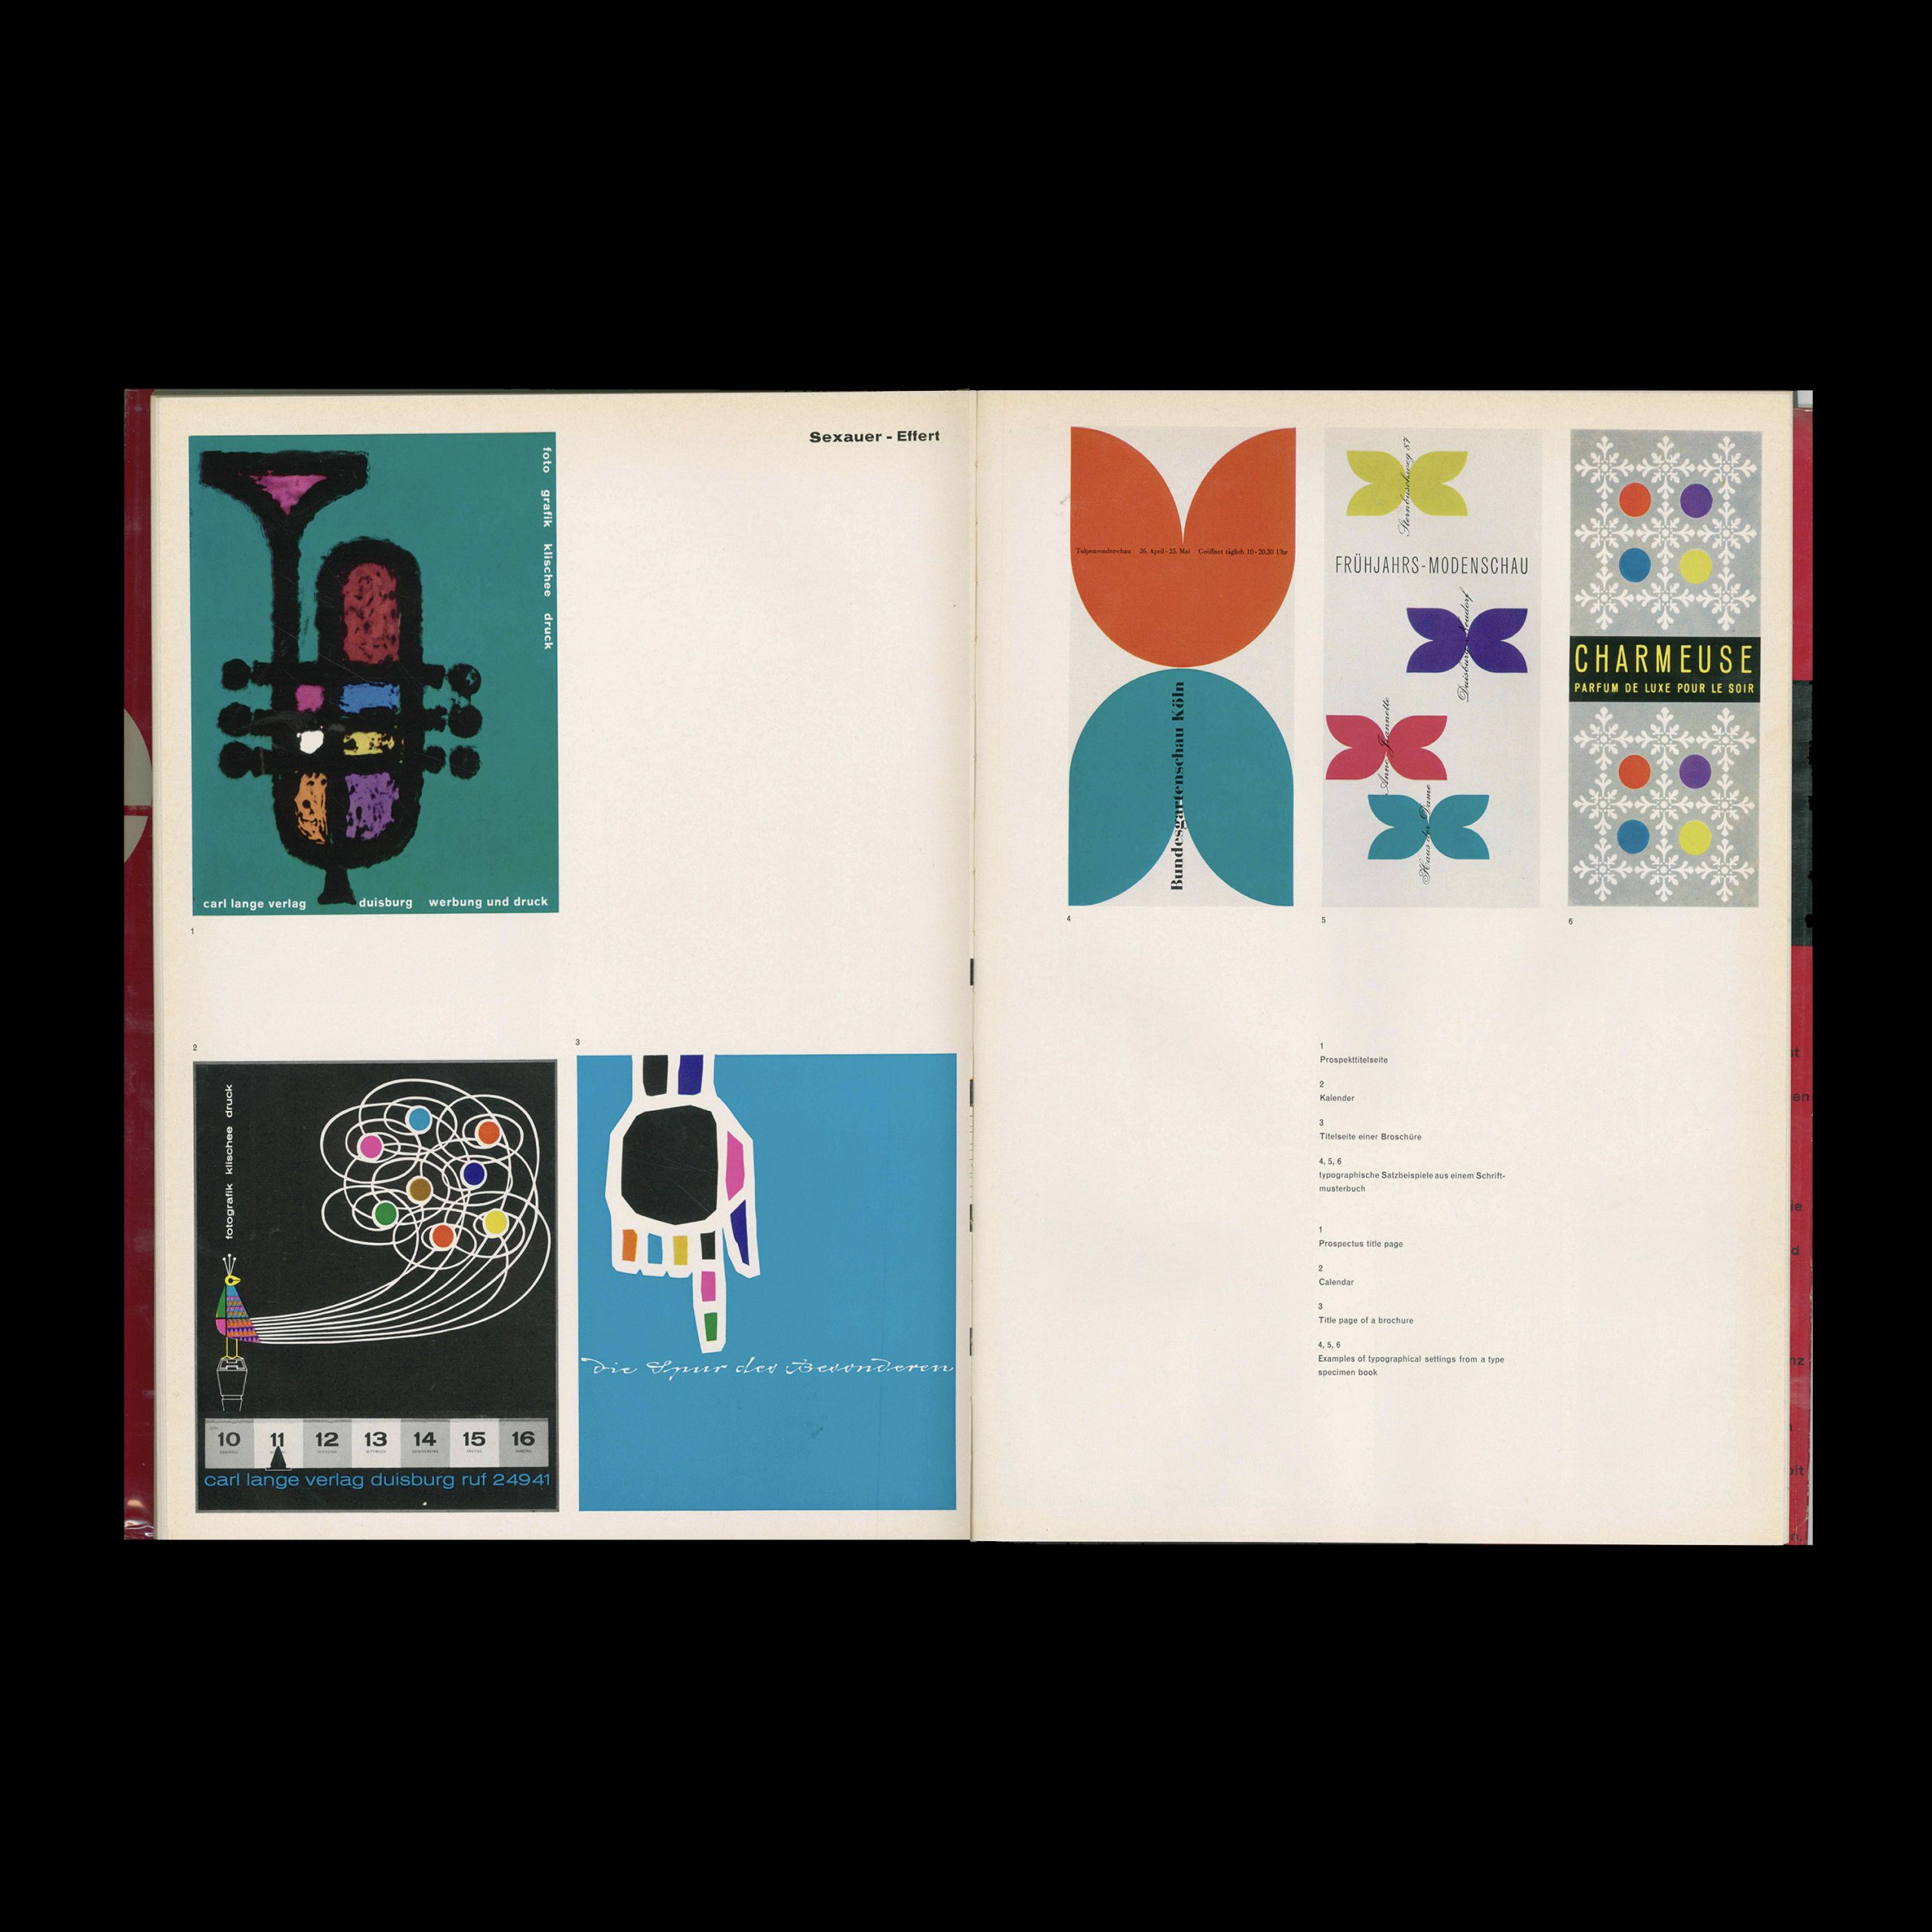 Werbeform 3, Annual Review Of Advertising And Design, 1959